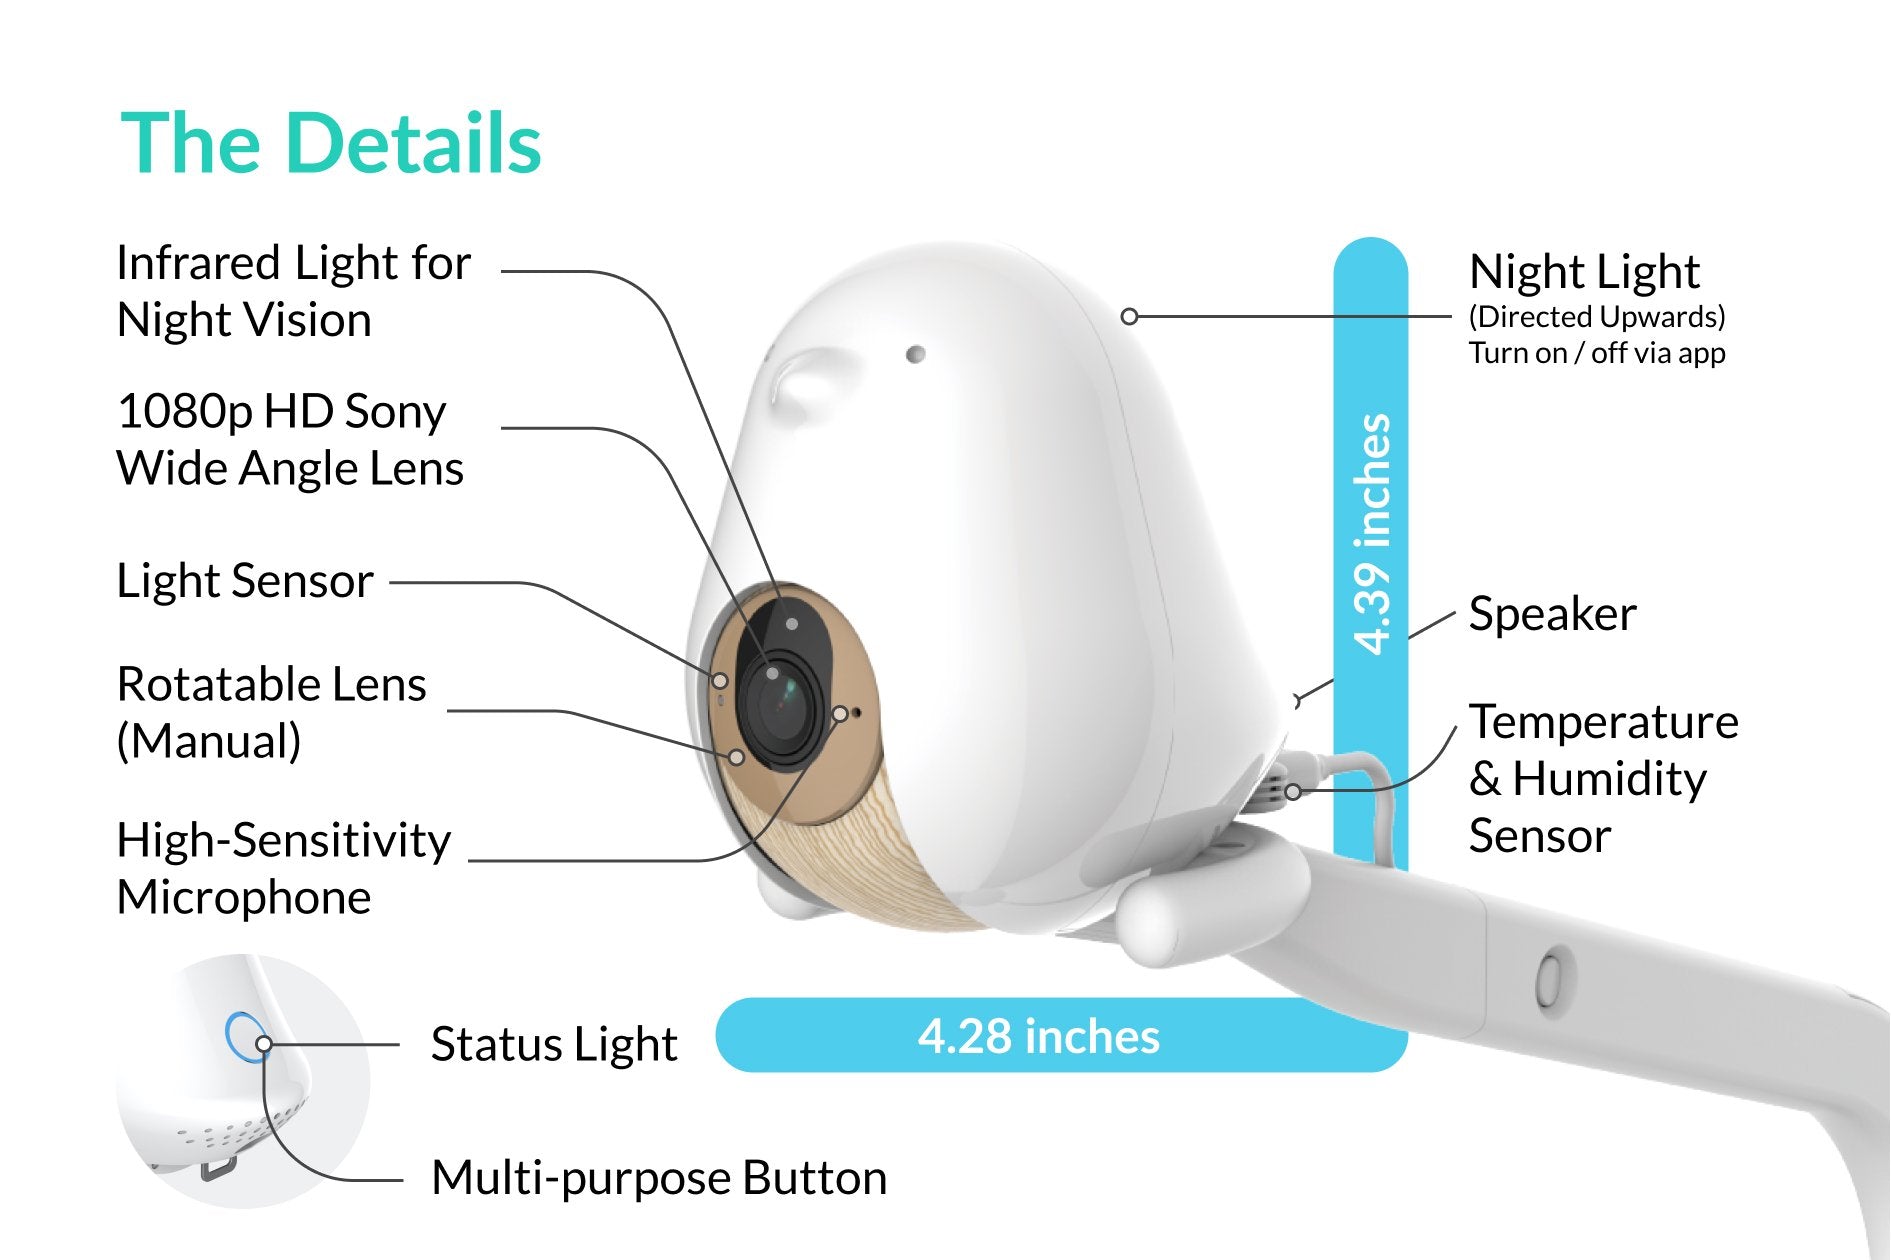 Cubo Ai Plus (Gen. 2) - Smart Baby Monitor | Proactive A.I. for Baby - Storming Gravity